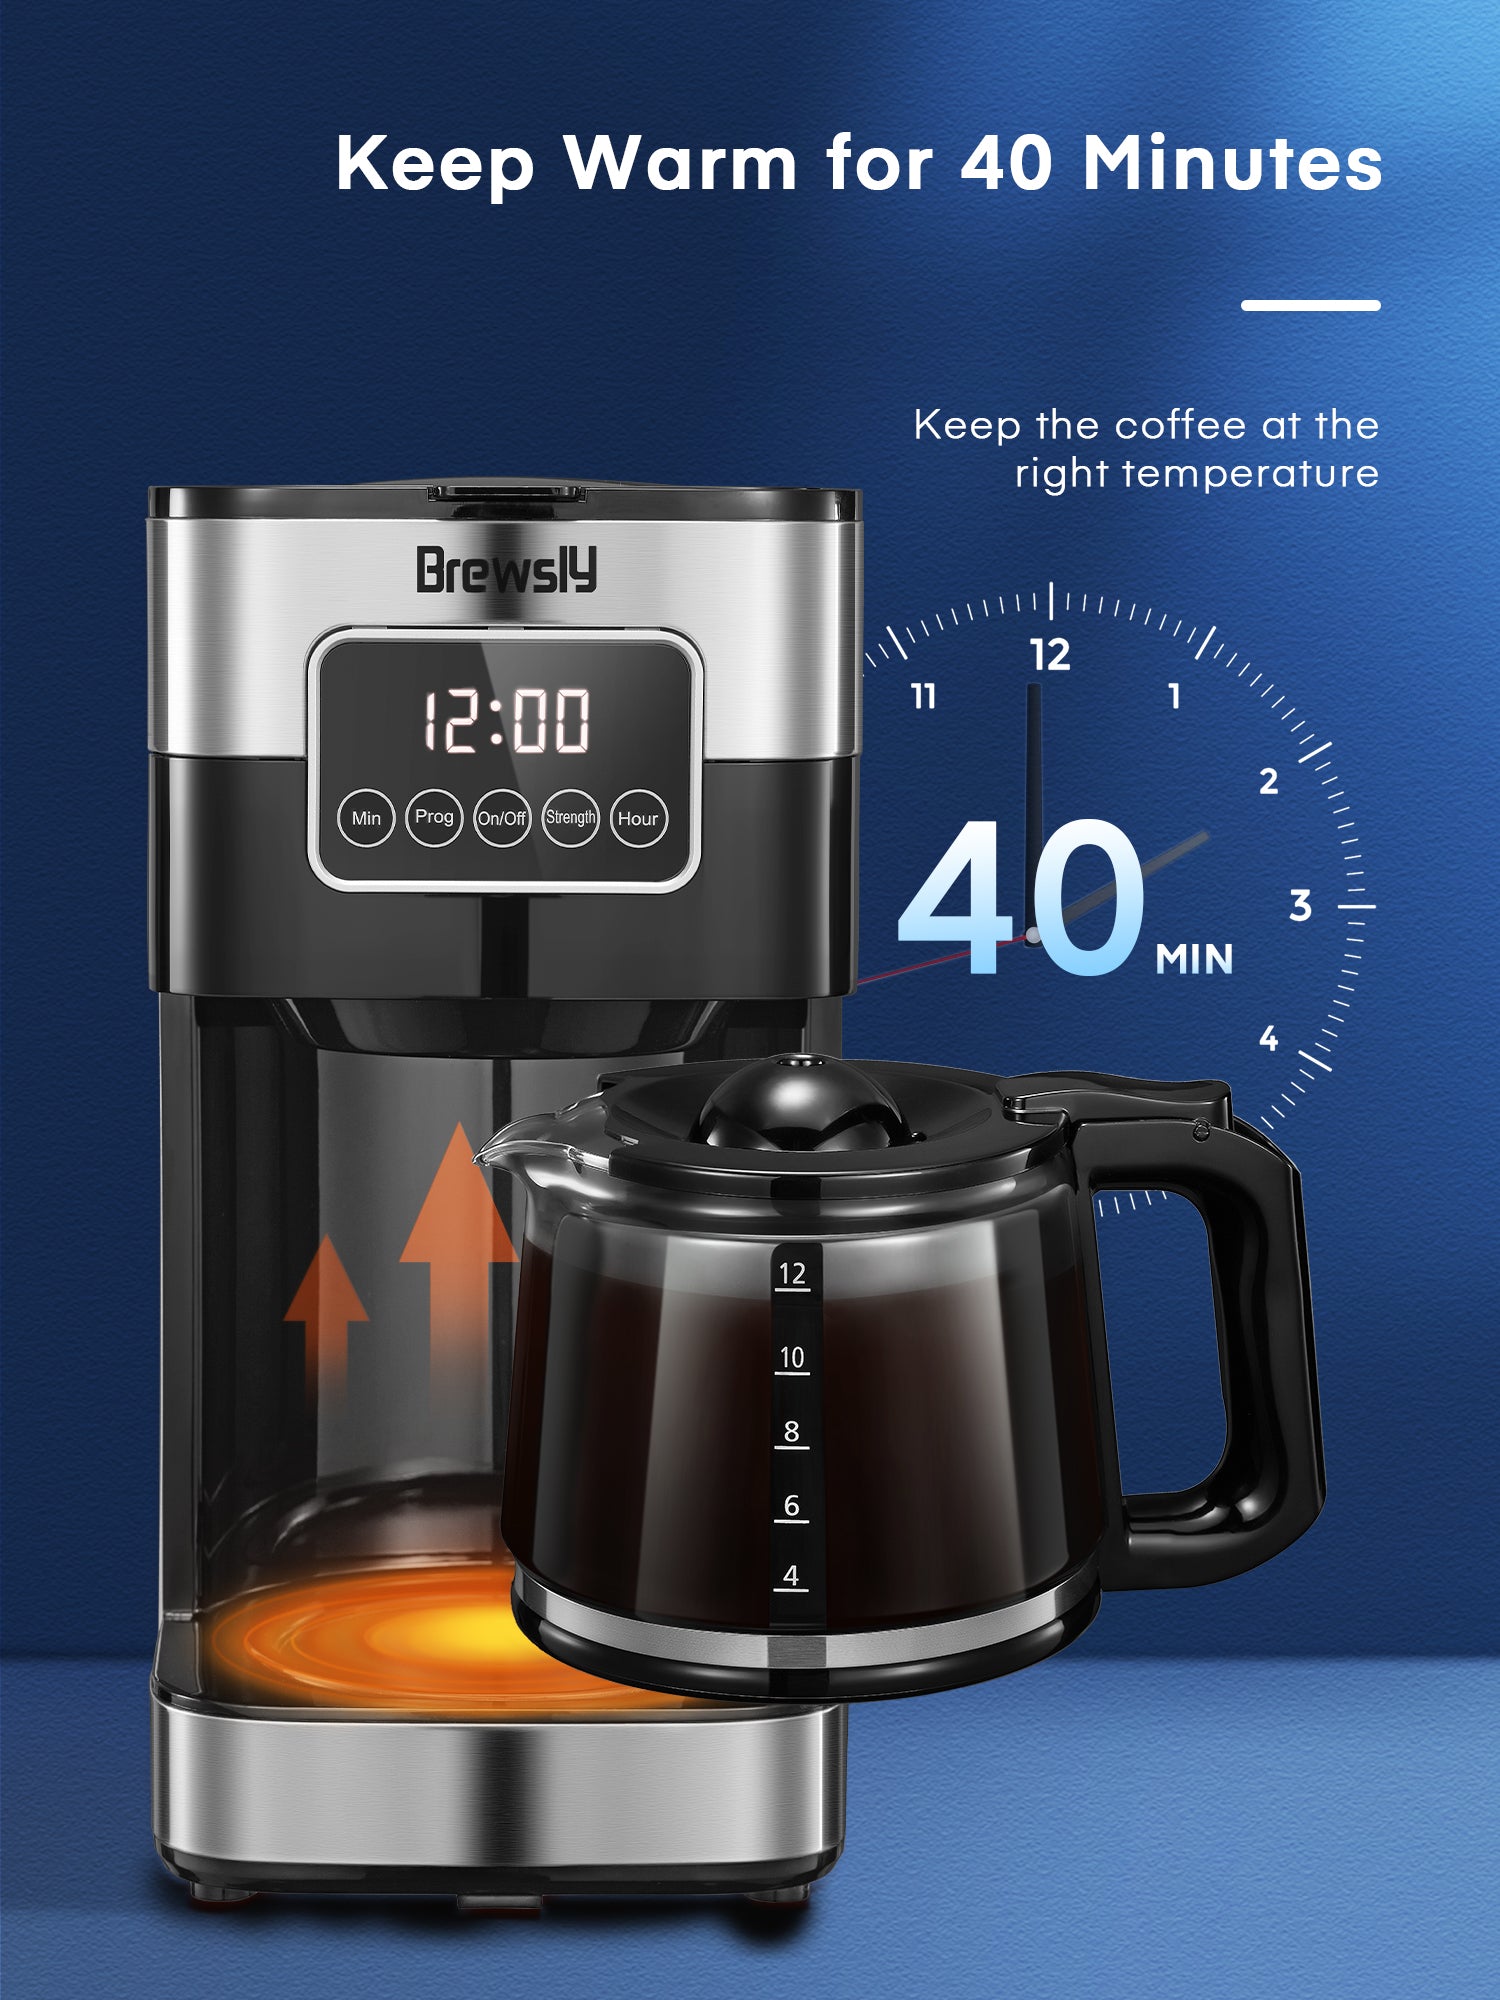 Brewsly 12-Cup Professional Coffee Maker, Touch Screen Coffee Machine with Regular and Thick Brews, Stainless Steel Coffee Brewer,  Keep Warm, Anti-Drip System